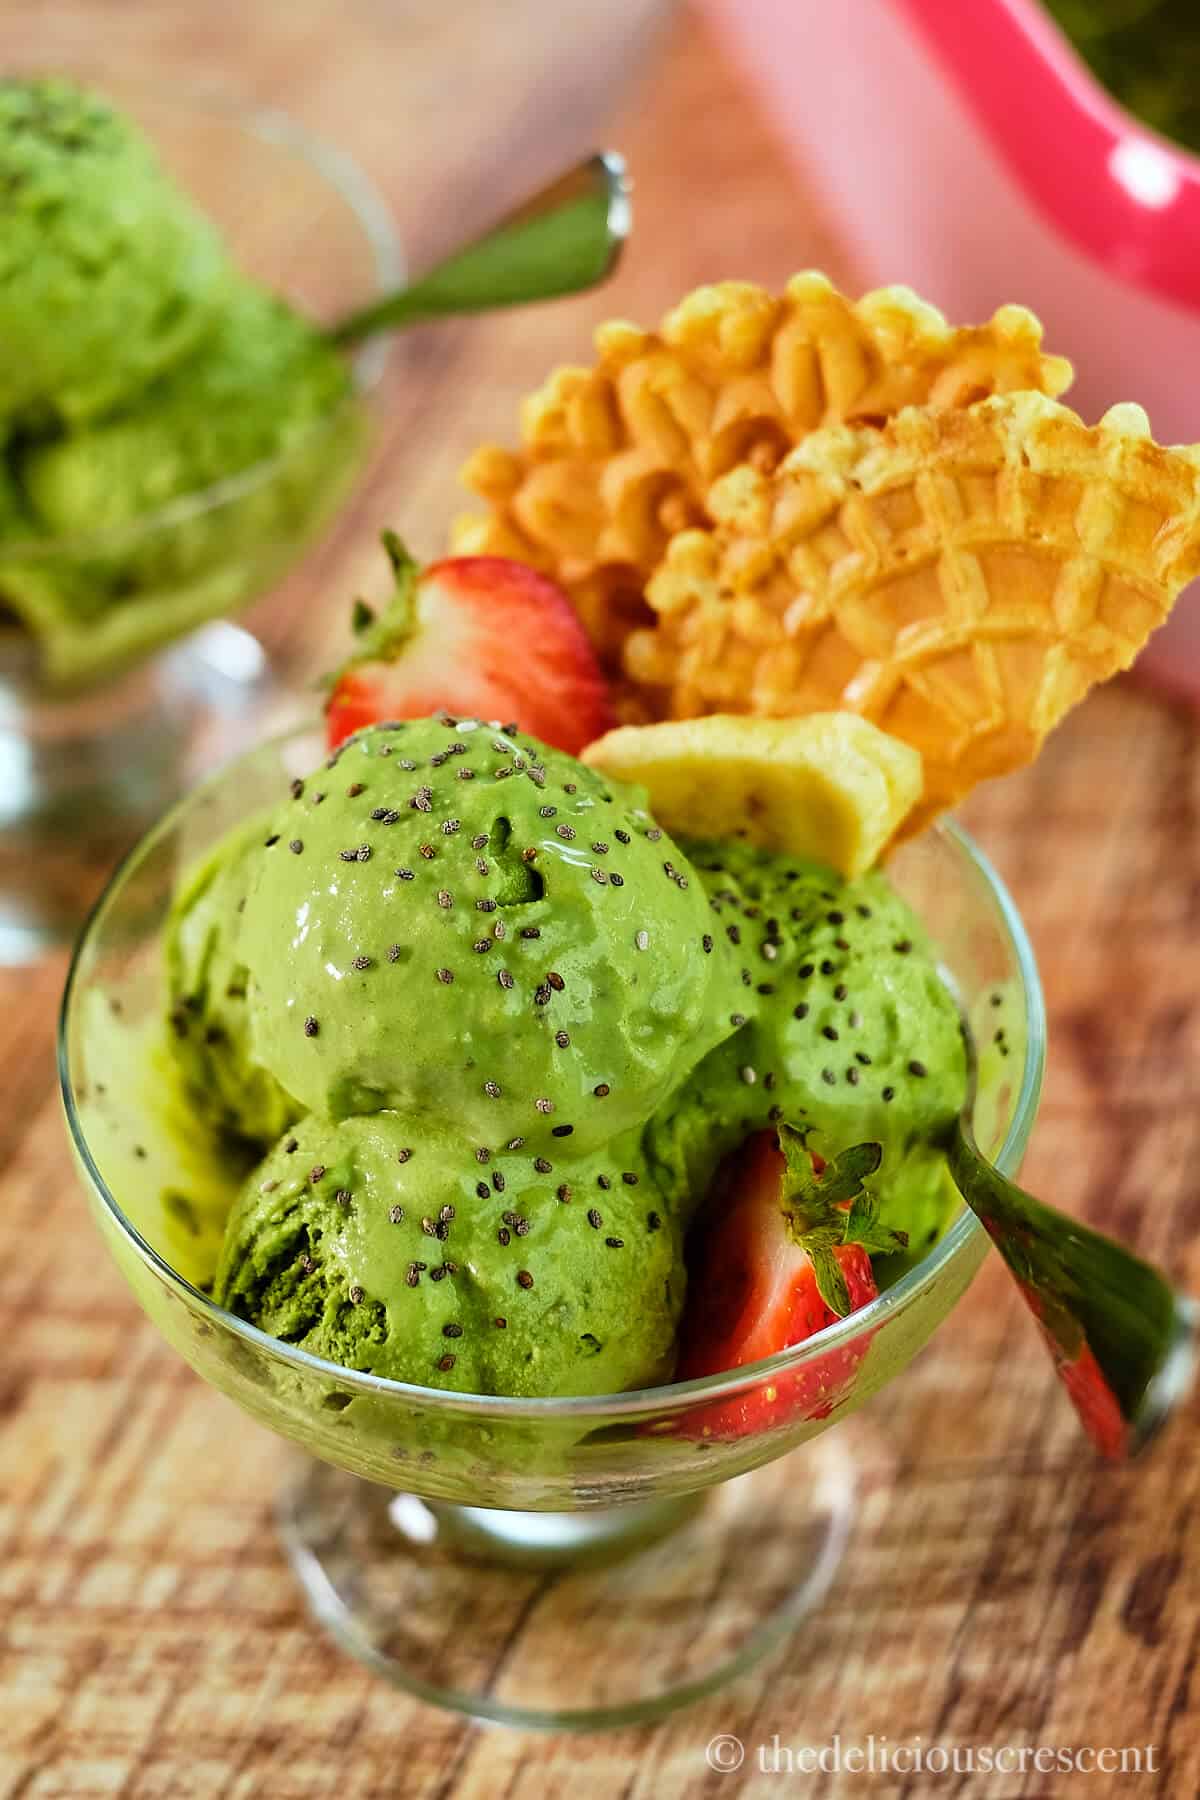 Matcha ice cream with wafers and fruit.